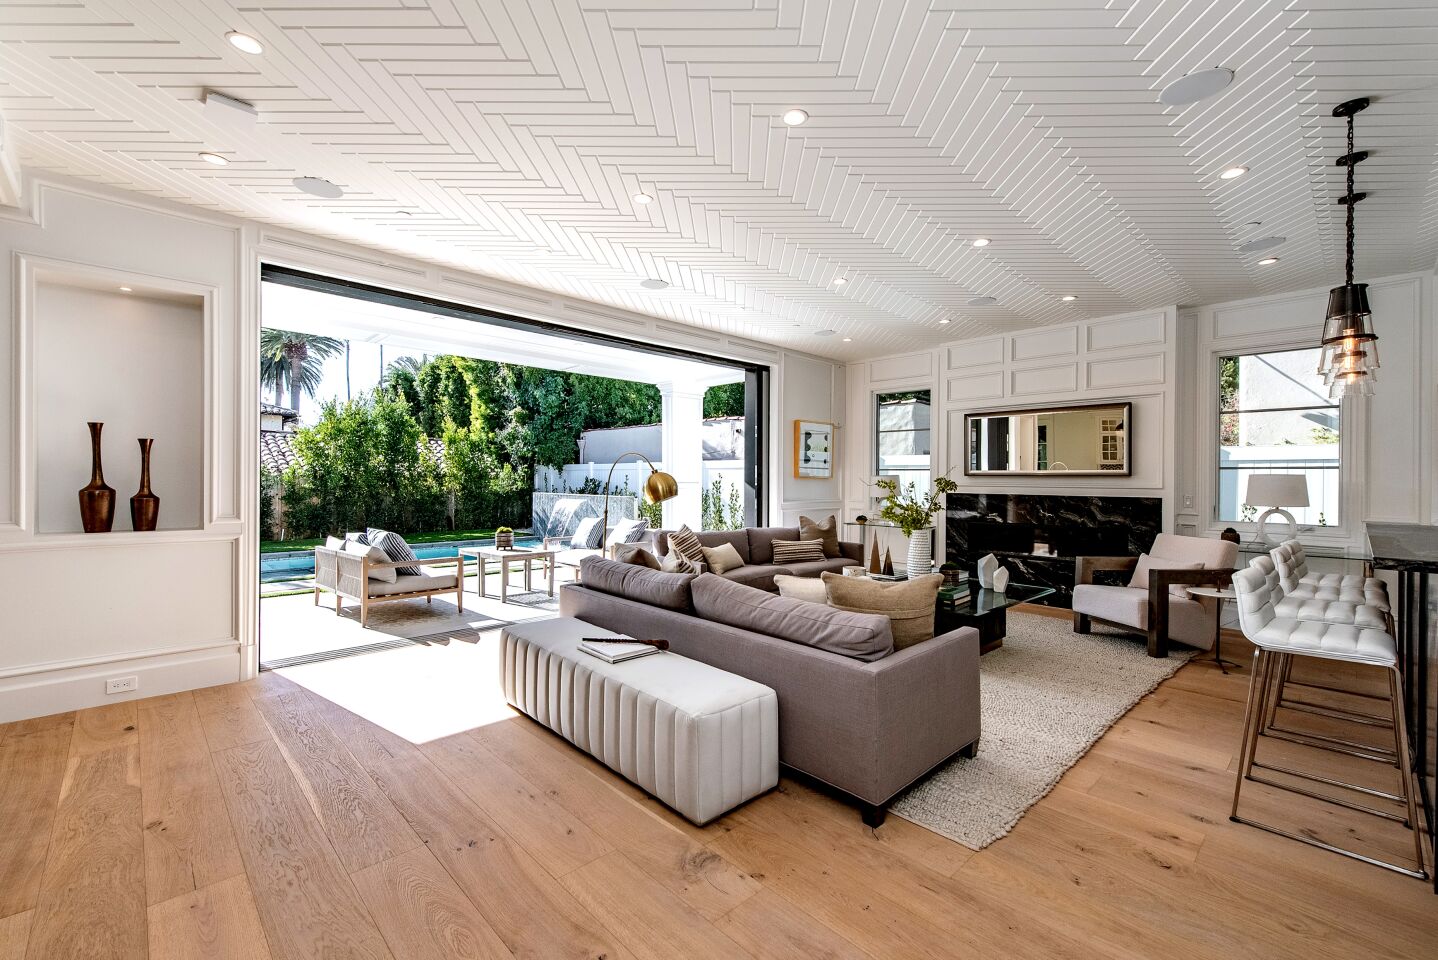 Listed for $8.899 million, the newly built home sits on a tree-lined street in the desirable North of Montana area of Santa Monica.